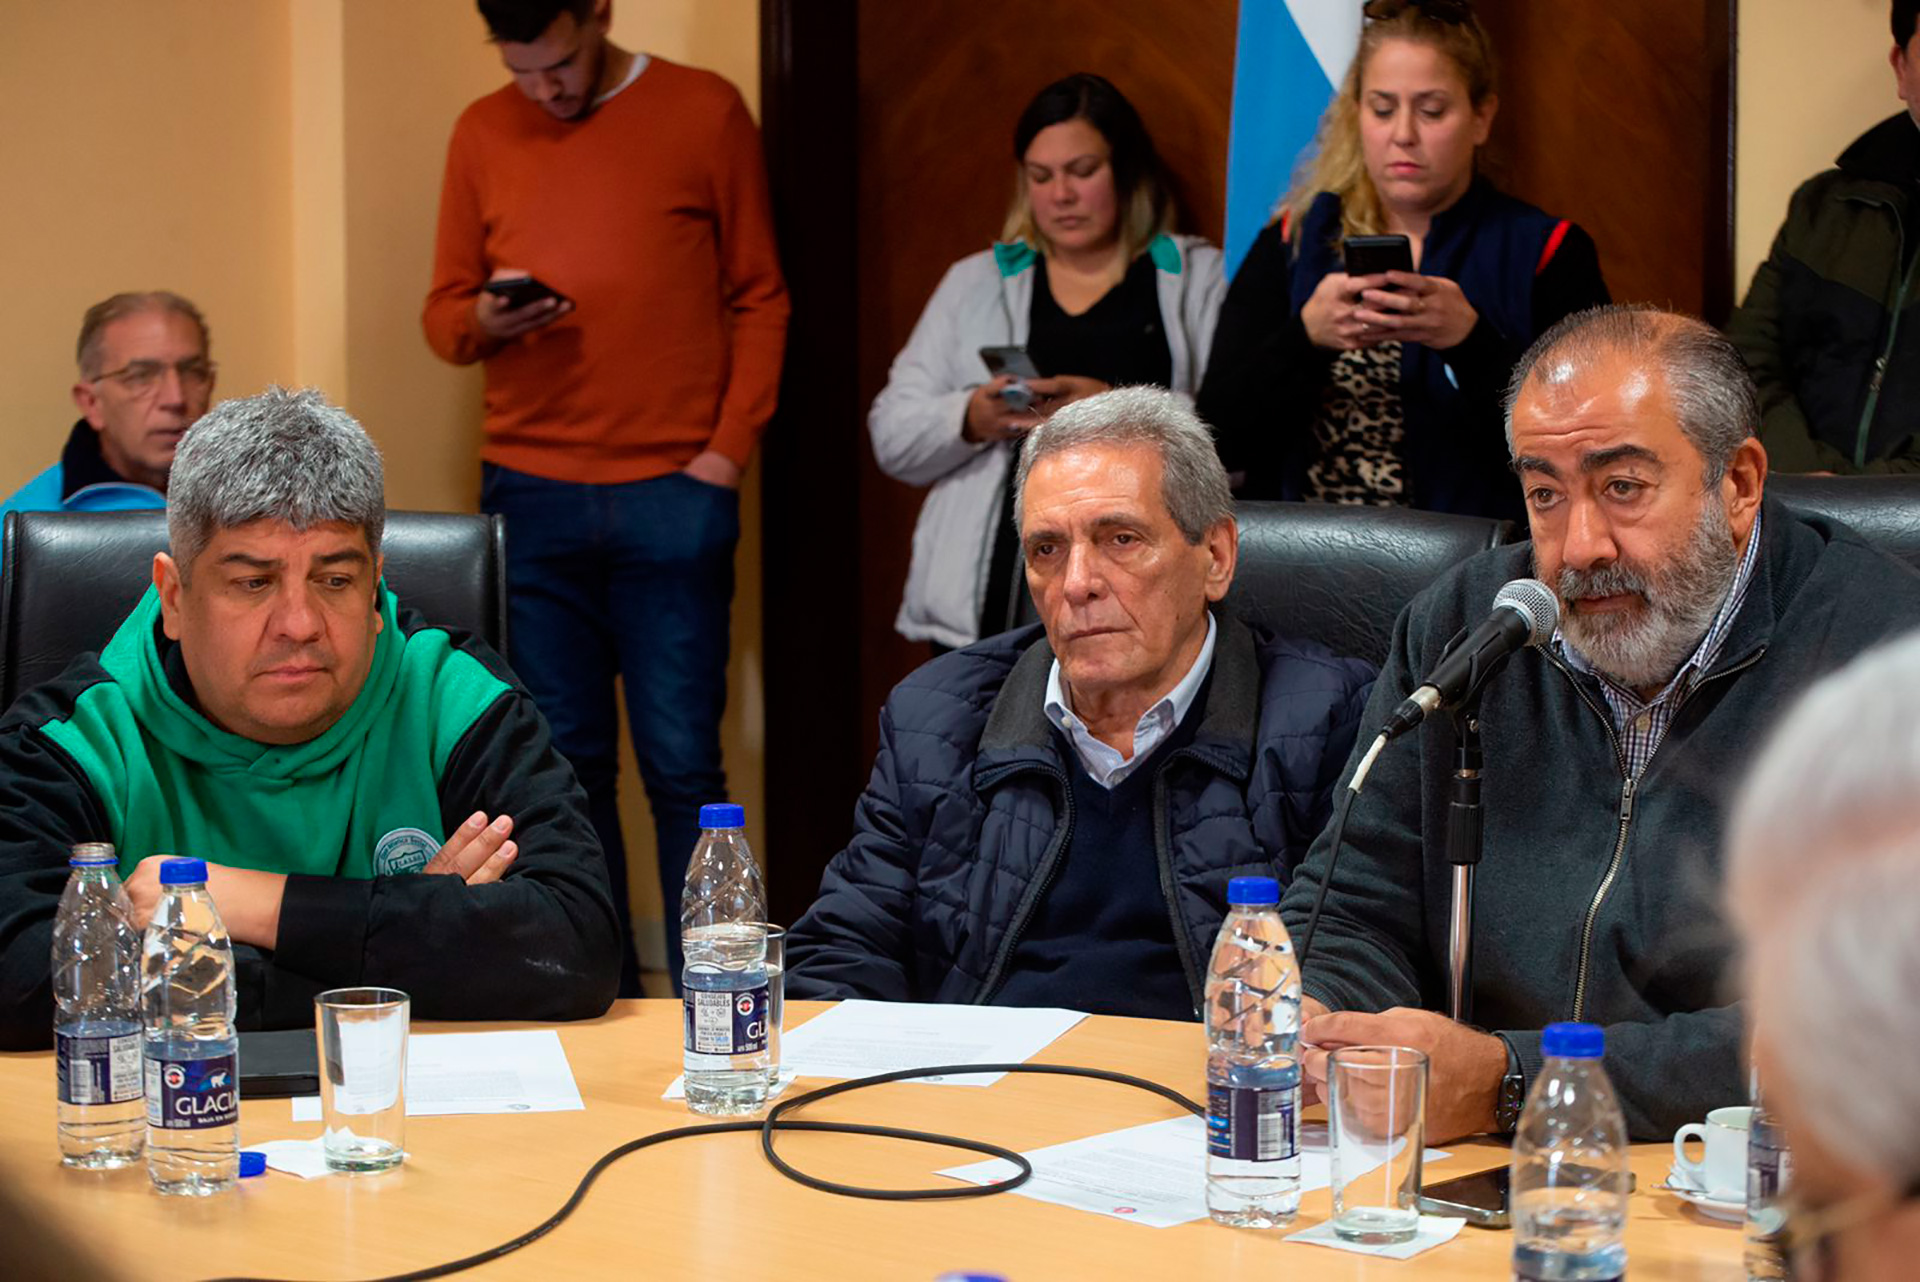 Pablo Moyano, Carlos Acuña and Héctor Daer, the triumvirate of the CGT